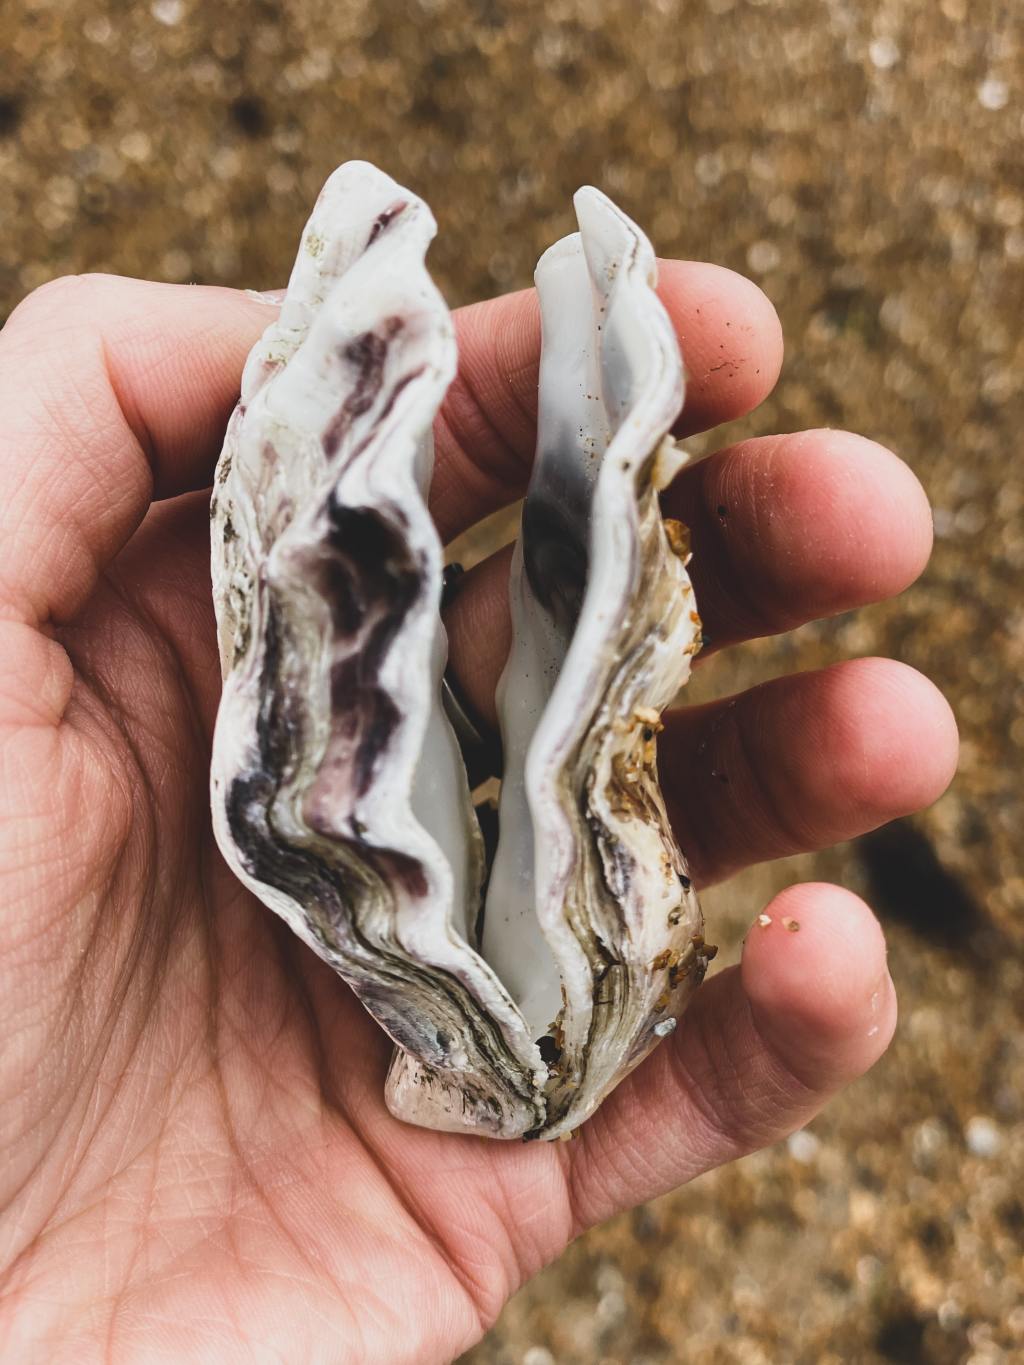 The Oyster.